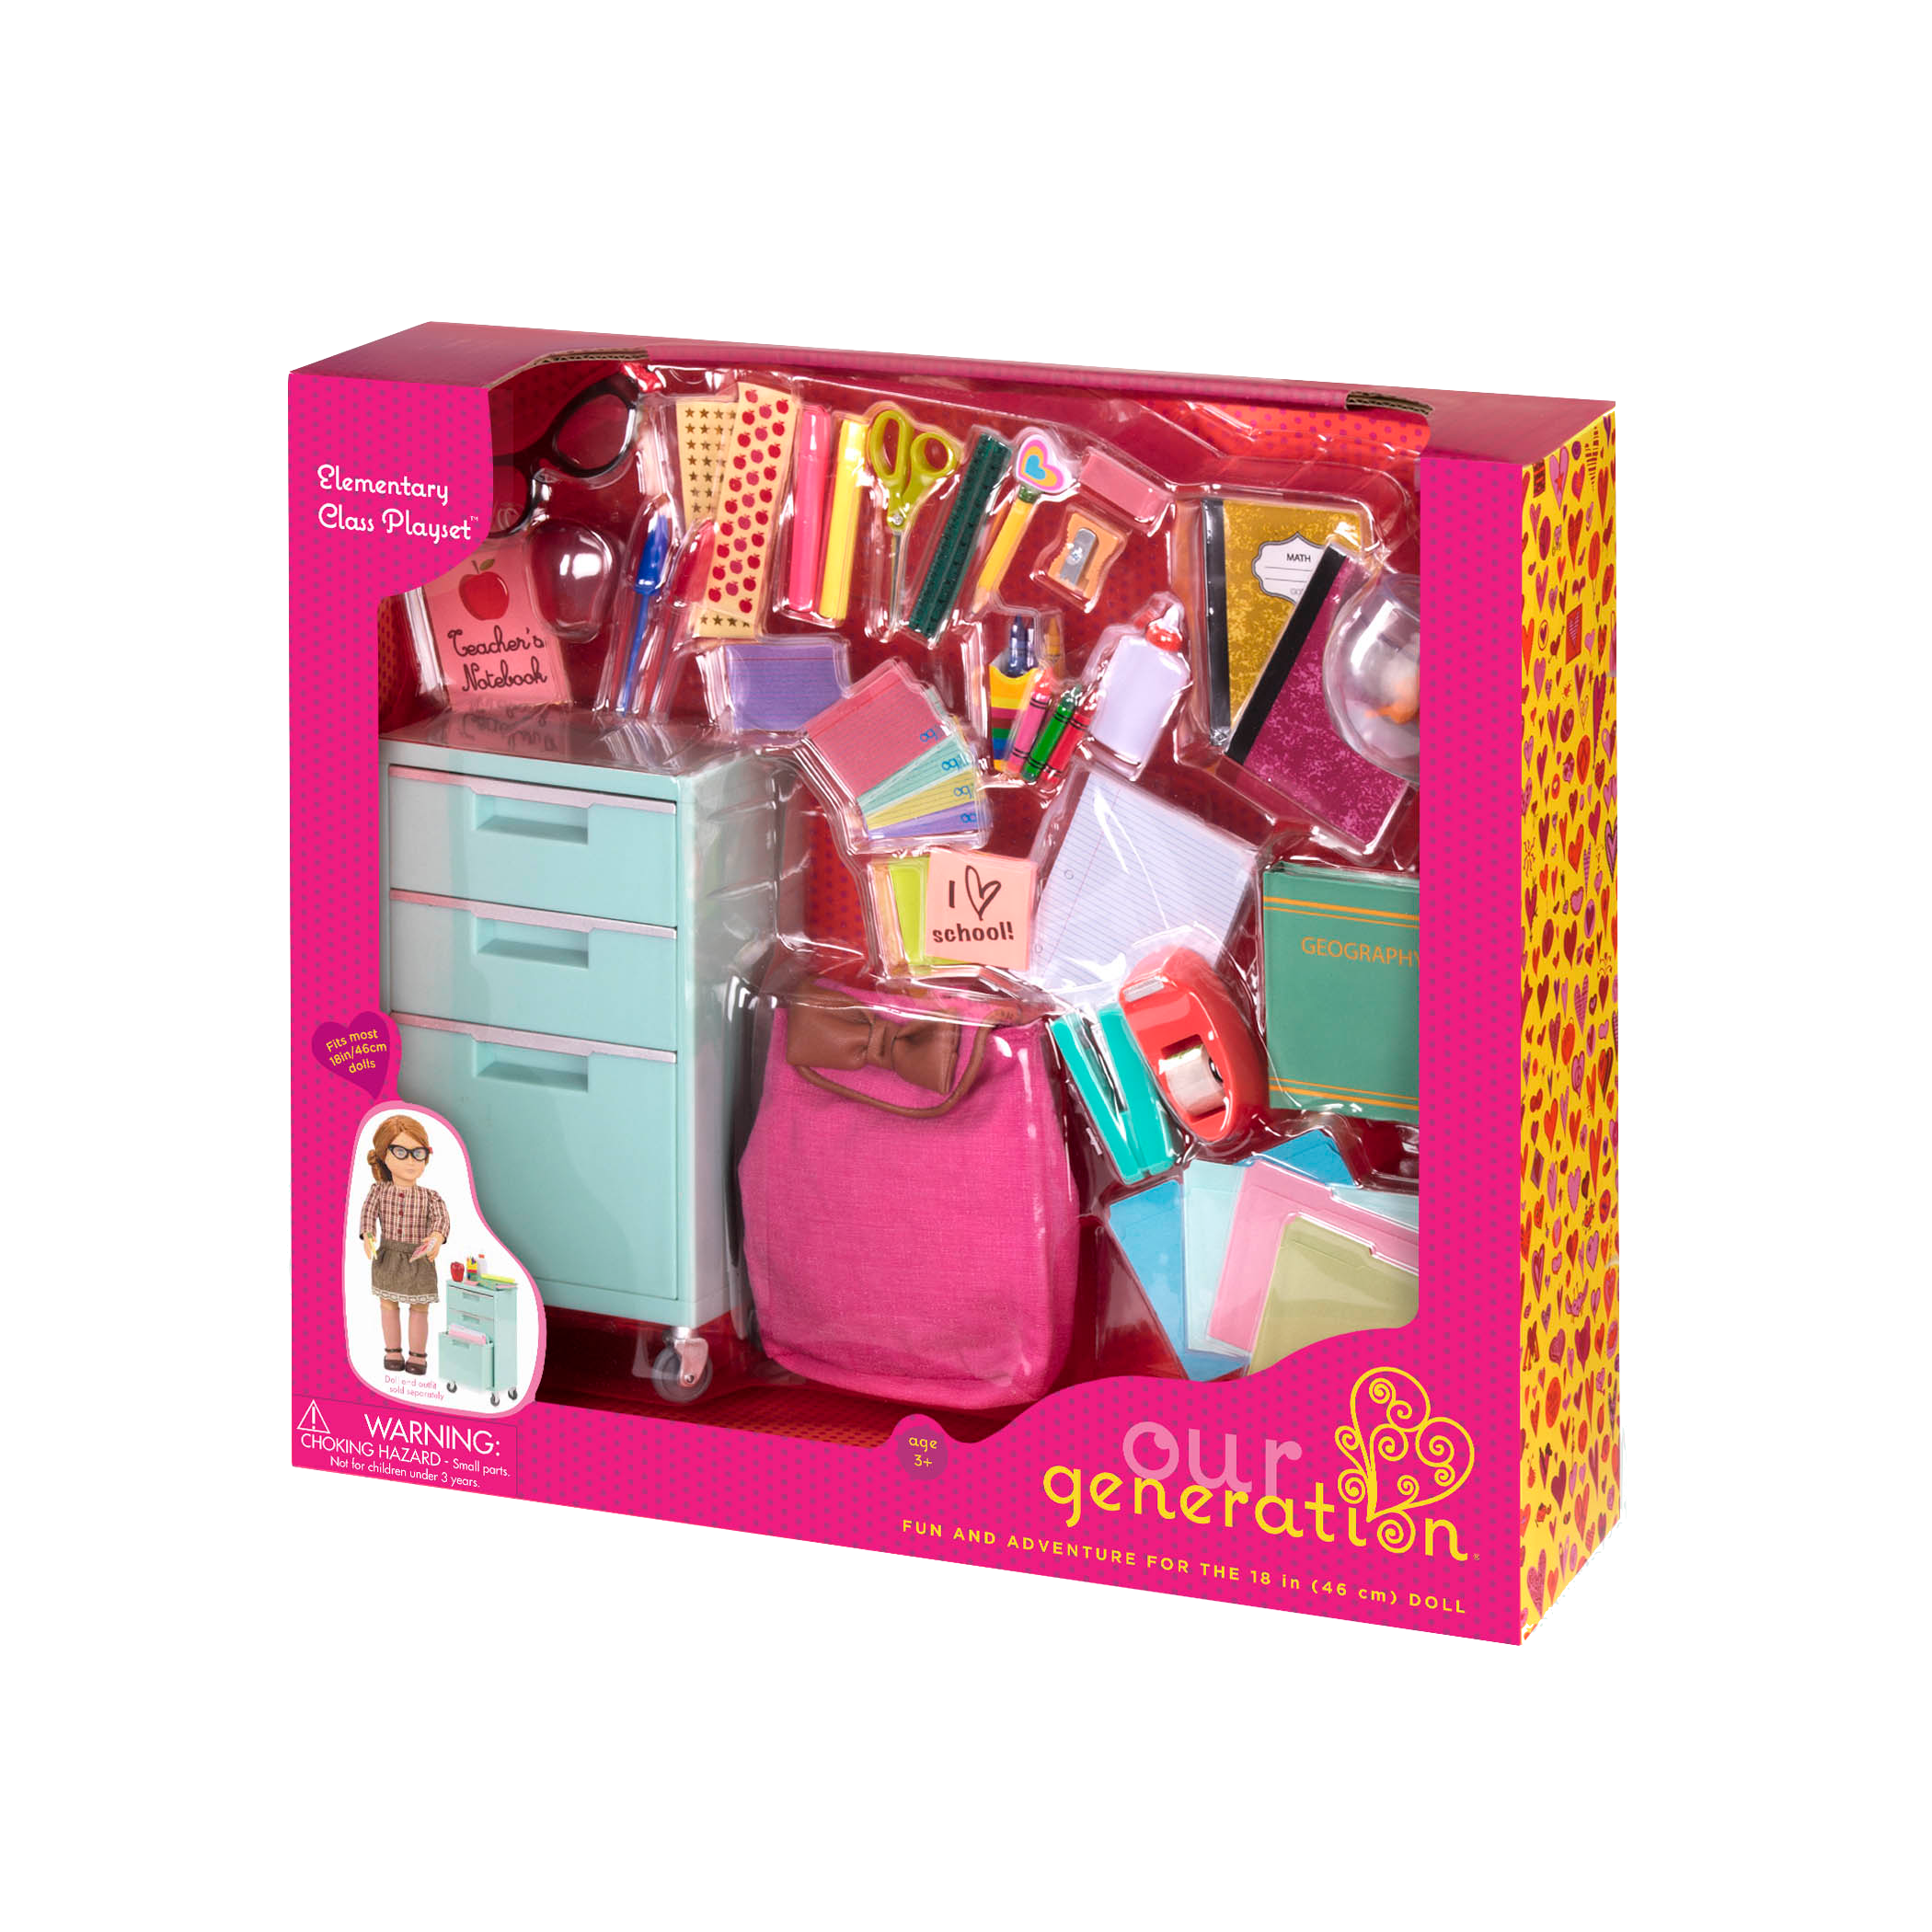 18-inch doll with school supply playset